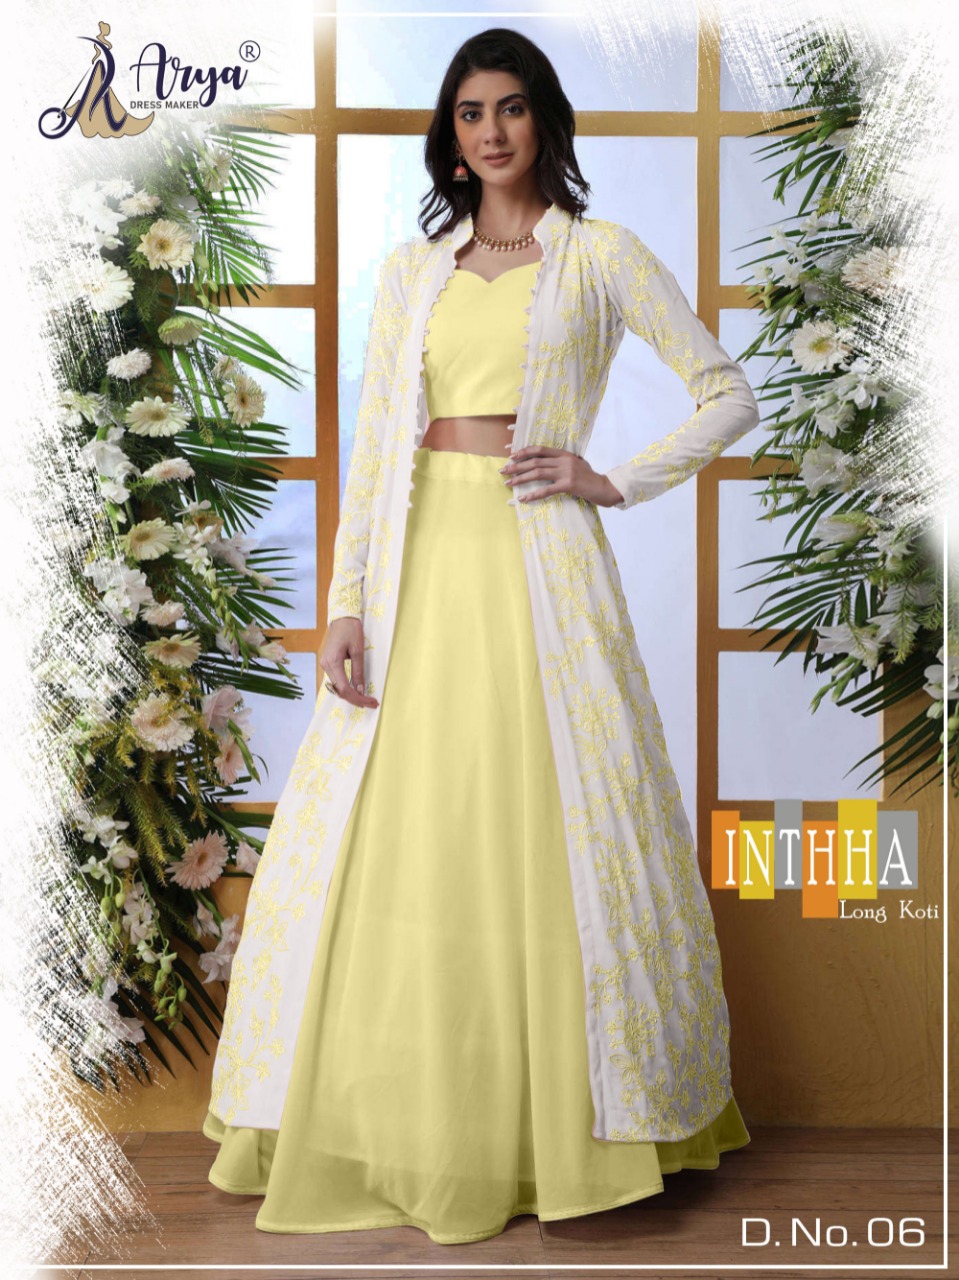 Aryadress Inthha Branded Crop Top Skirt Jacket Catalog Lowes